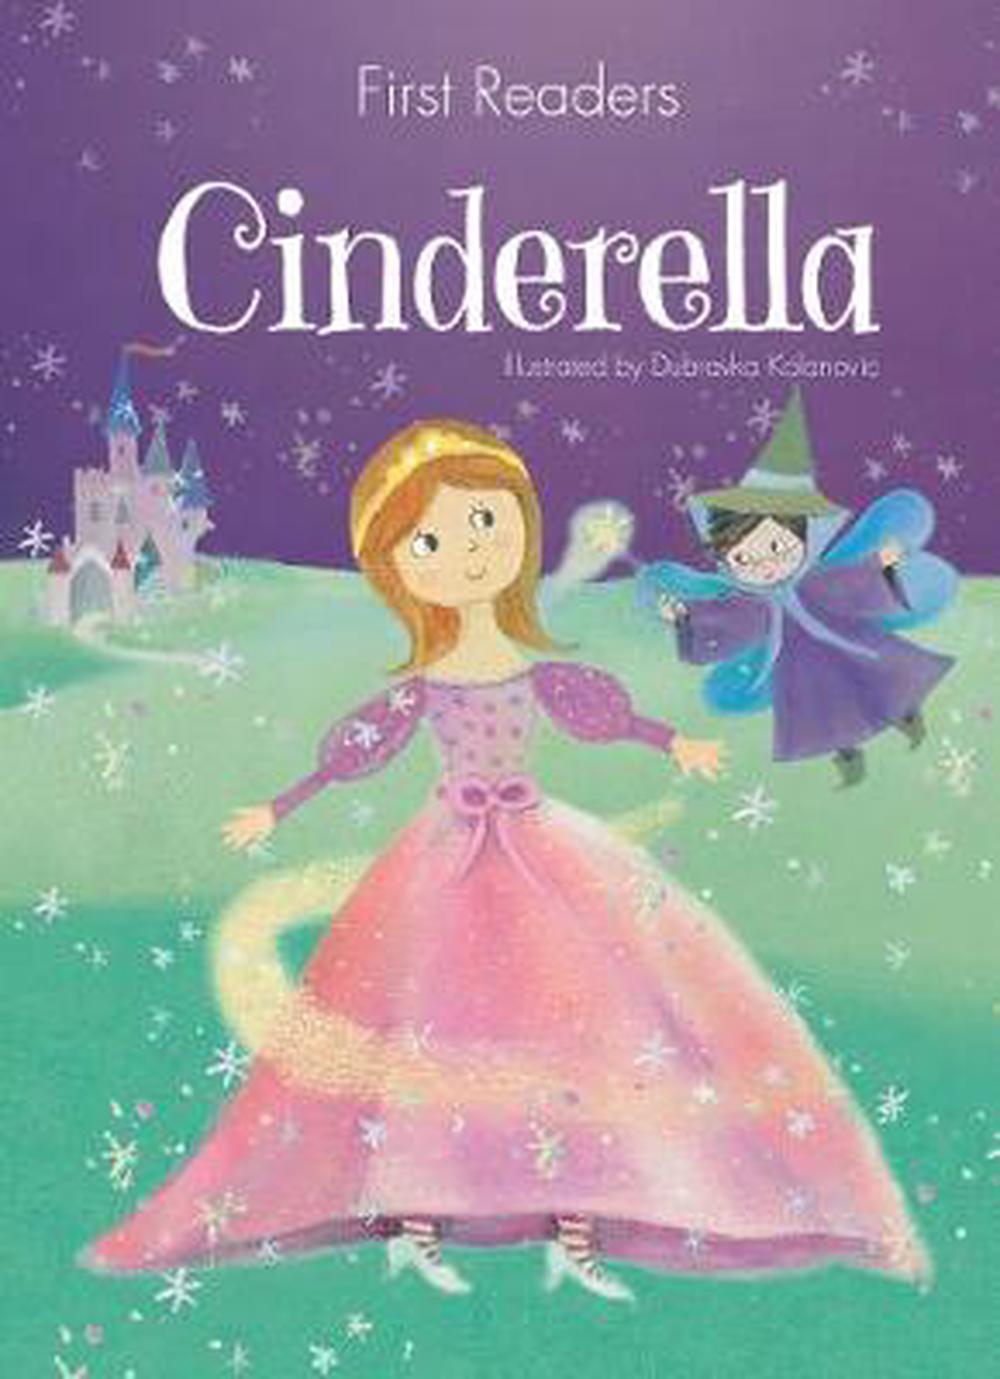 First Readers Cinderella Hardcover Book Free Shipping! 9781527008588 | eBay